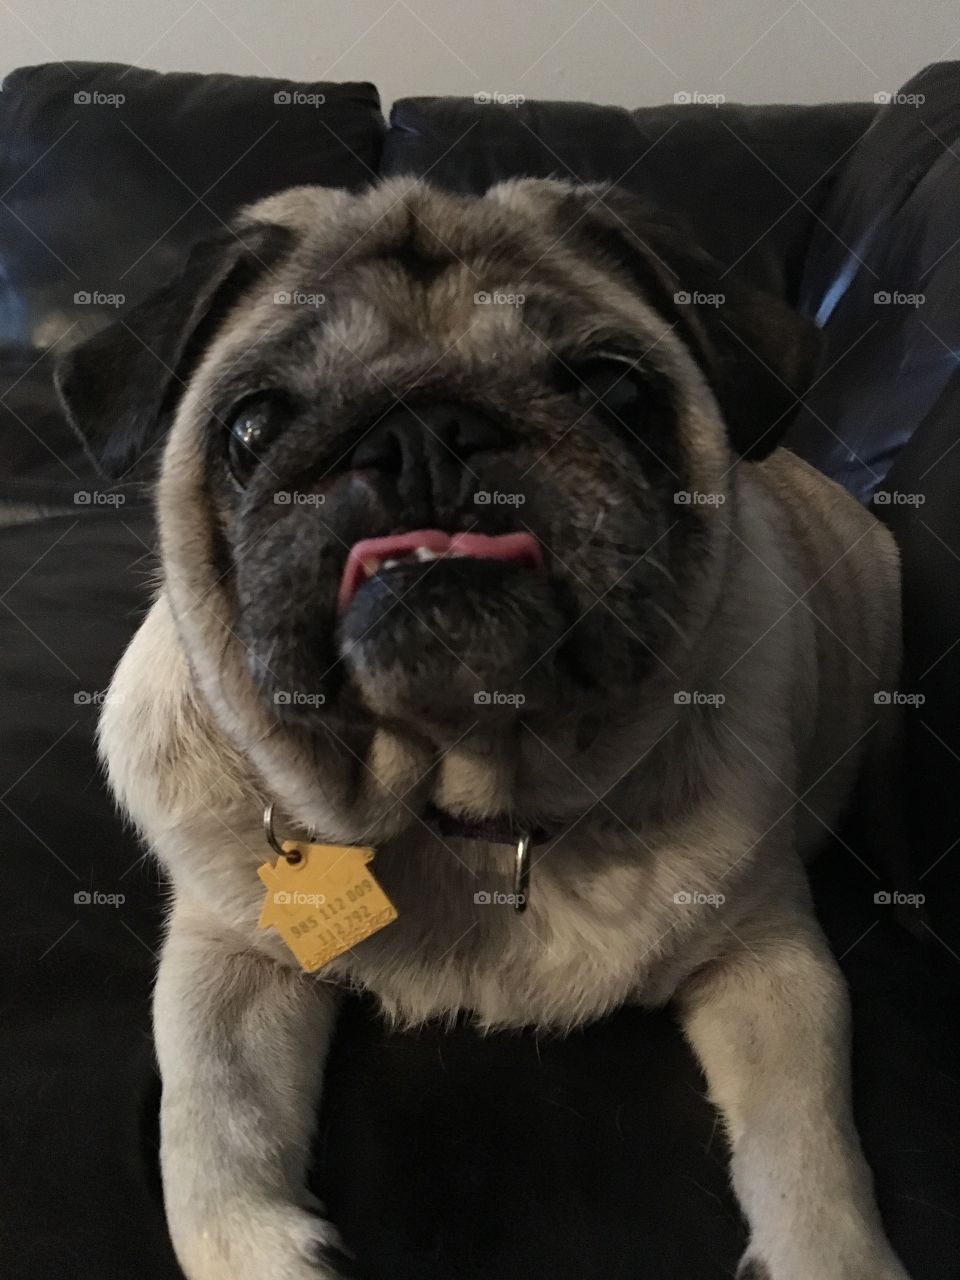 Maggie the Pug